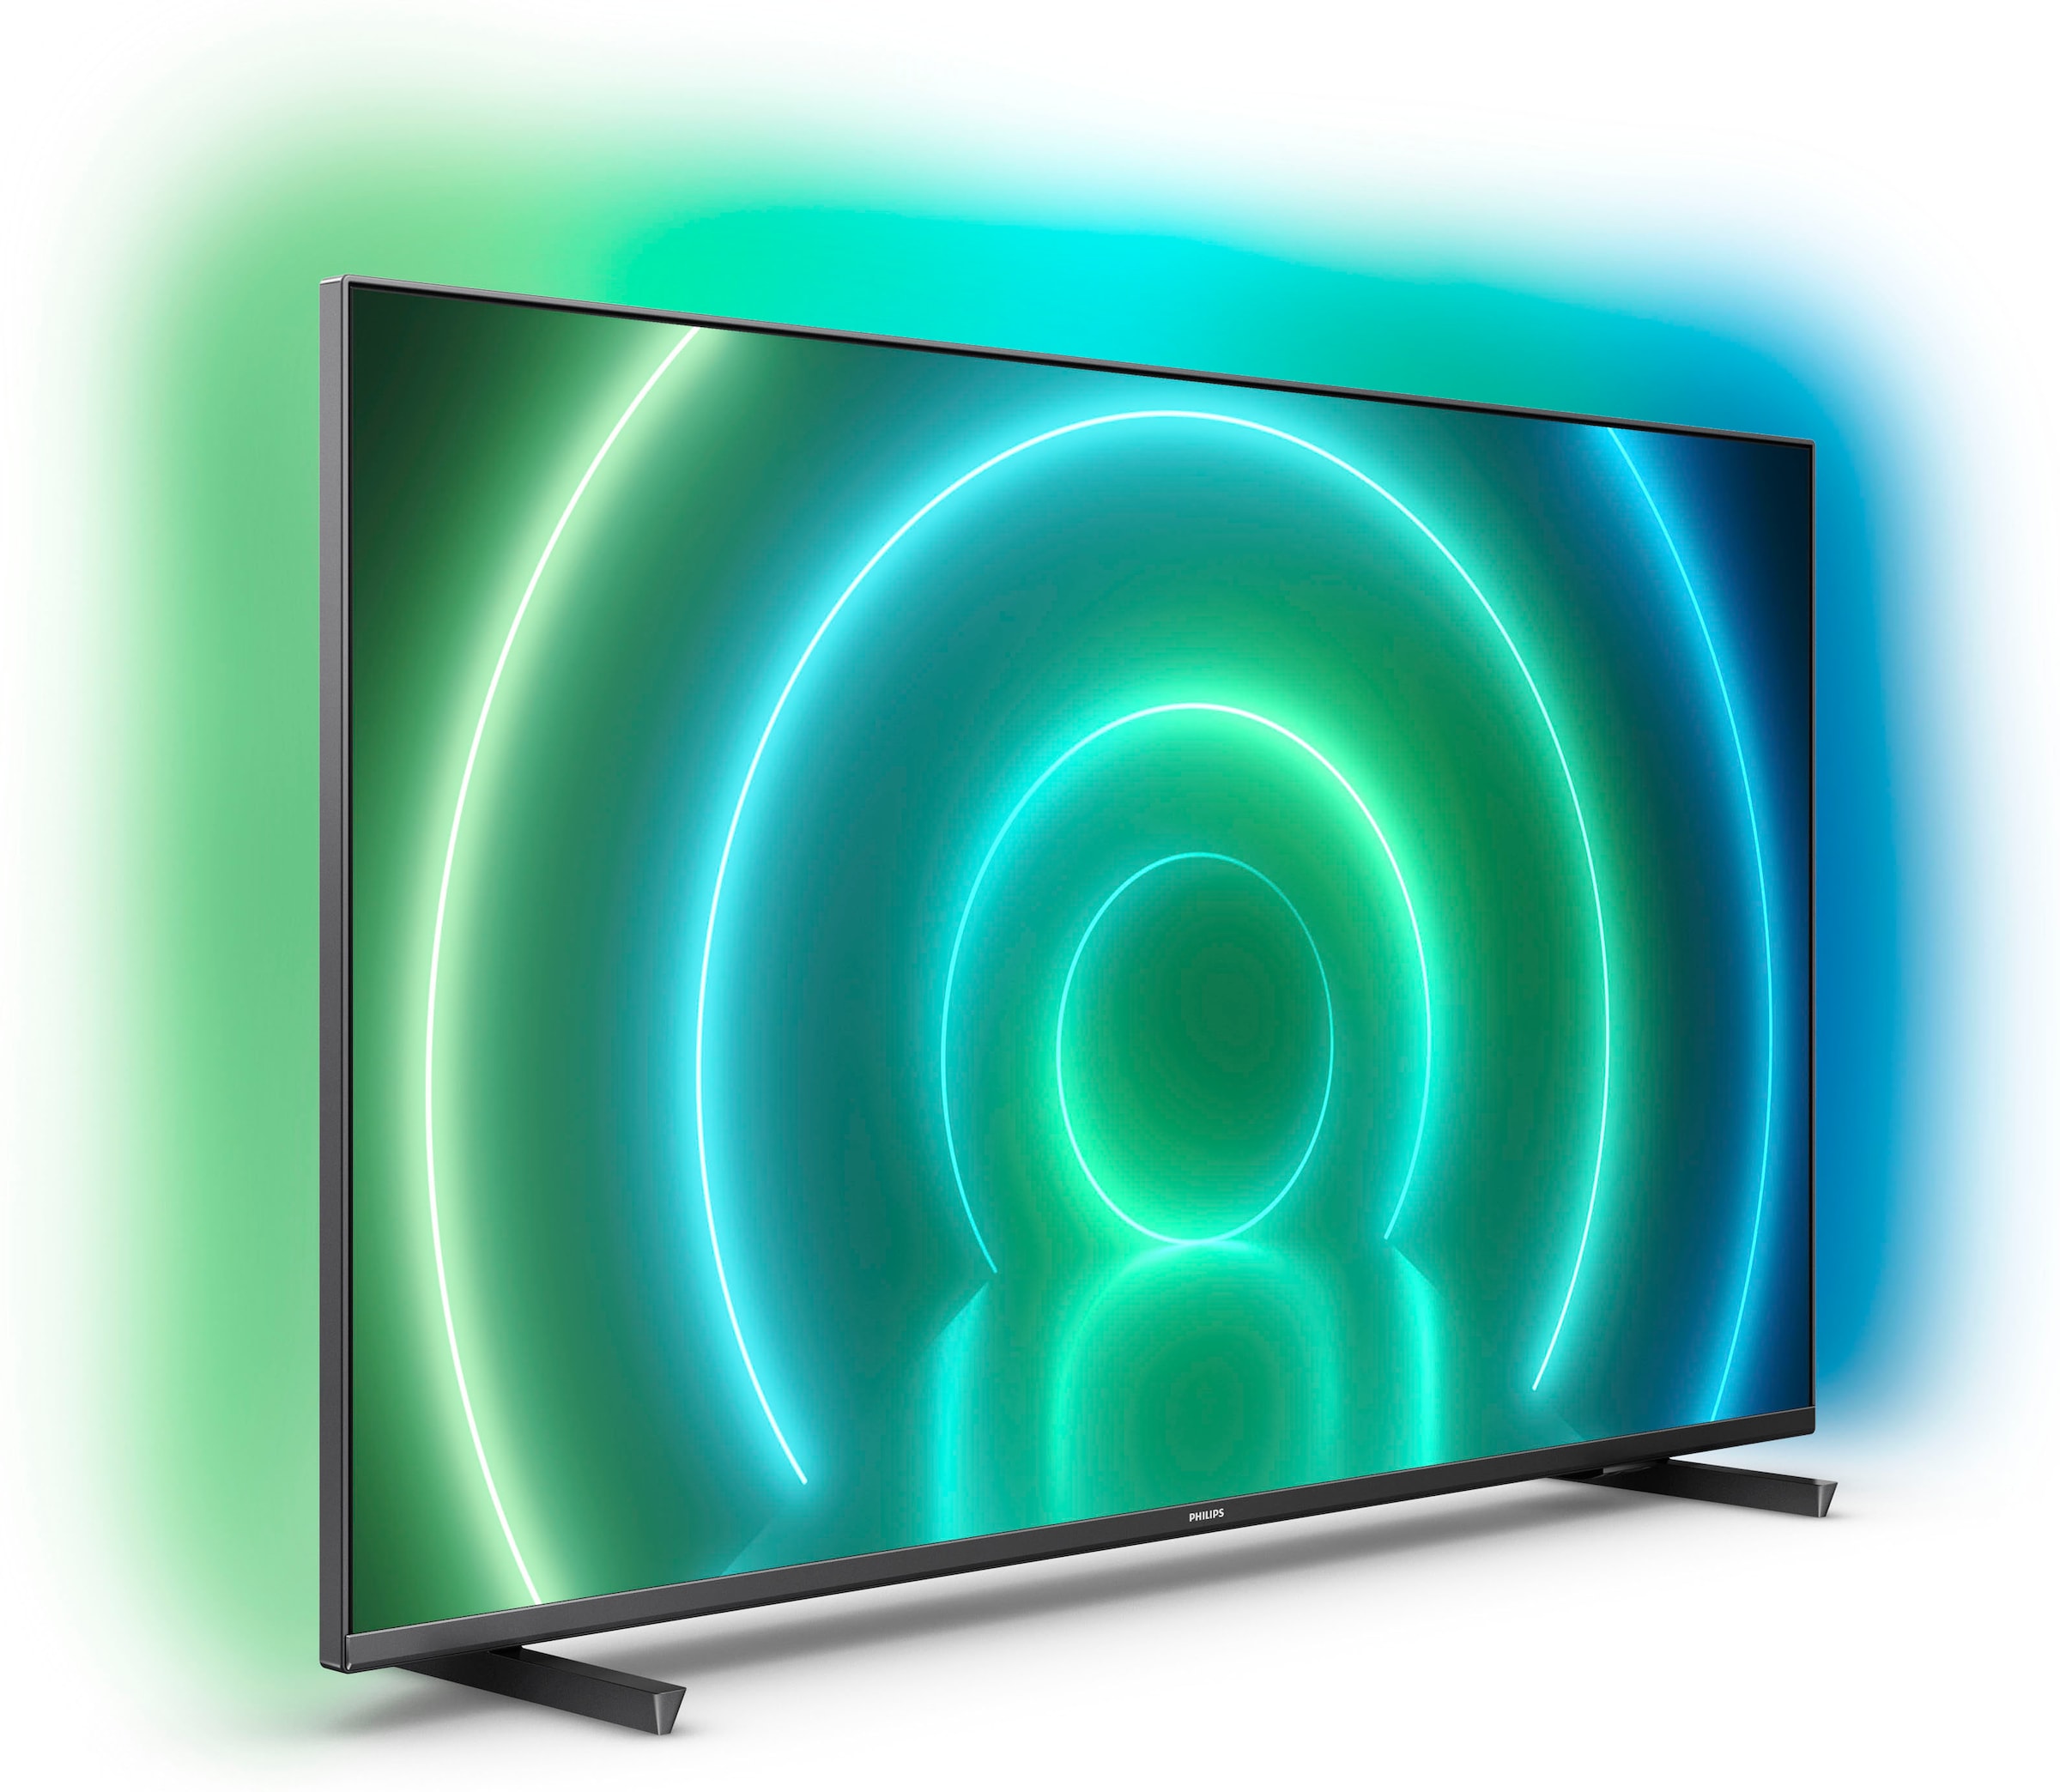 Philips LED-Fernseher, 126 cm/50 Zoll, 4K Ultra HD, Android TV-Smart-TV, 3-seitiges Ambilight